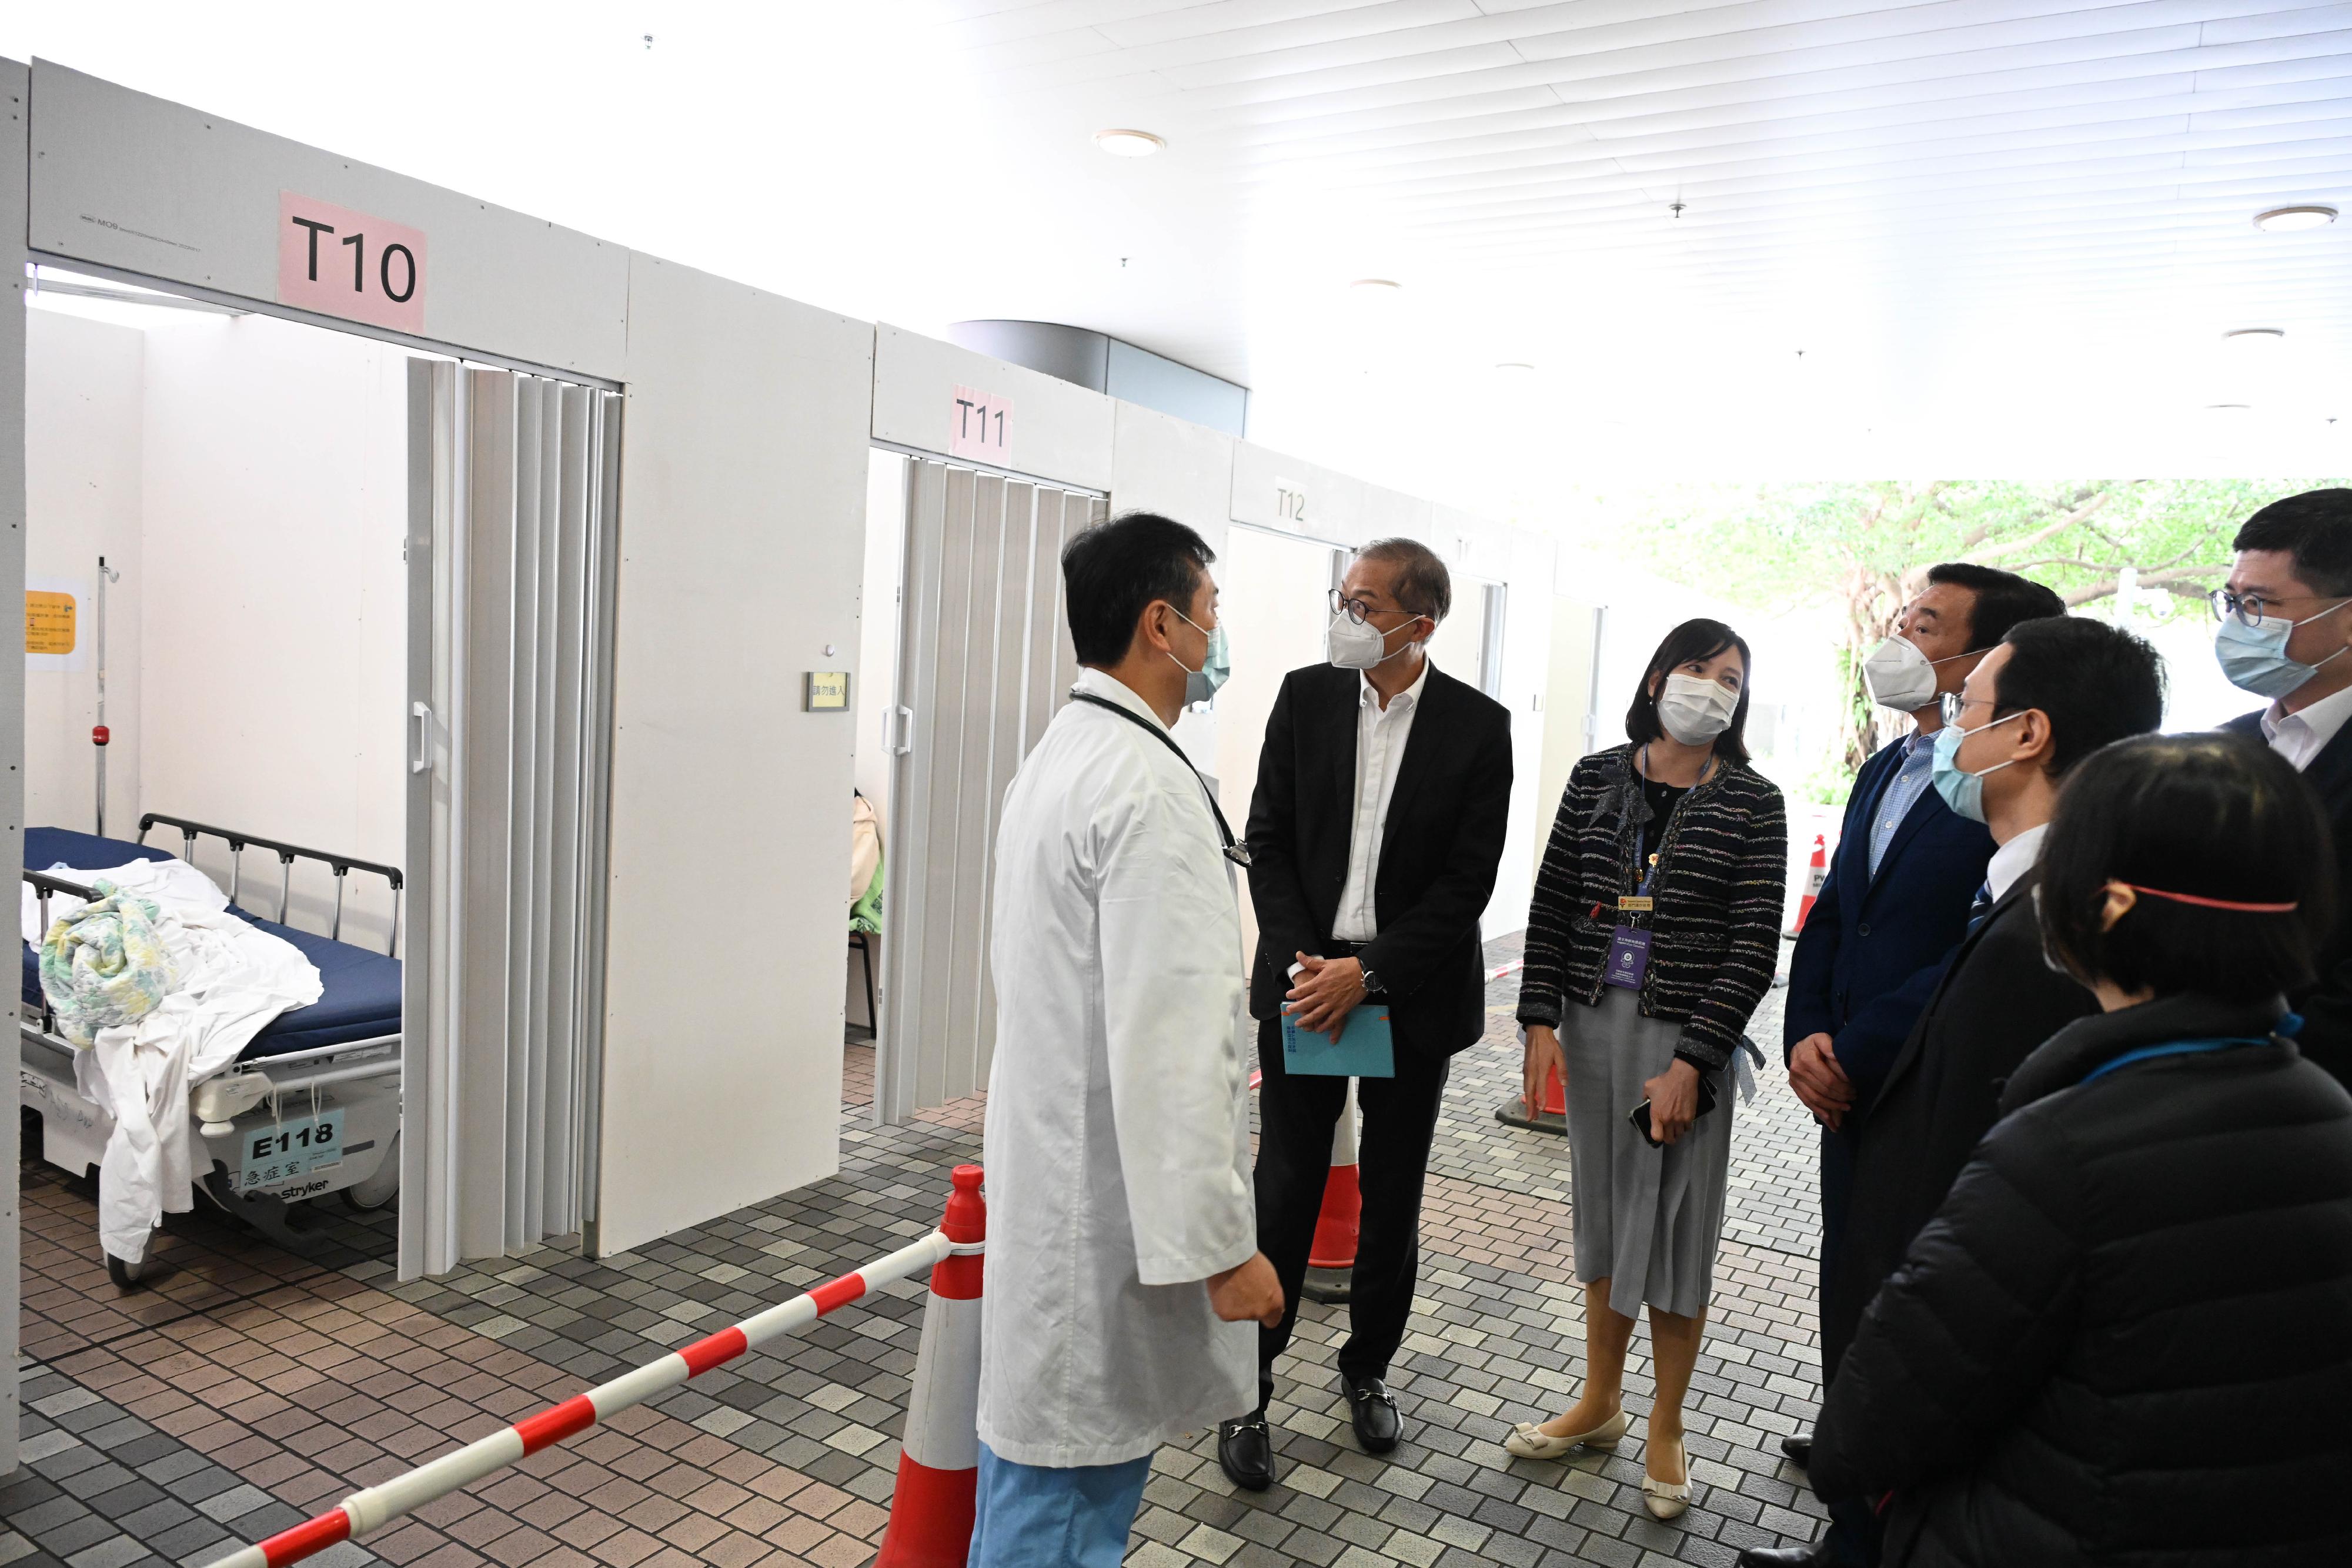 The Secretary for Health, Professor Lo Chung-mau (second left), visited Prince of Wales Hospital today (December 7) to get a better grasp of the operation of the hospital. The Hospital Authority (HA) Chairman, Mr Henry Fan (fourth left), and the HA Chief Executive, Dr Tony Ko (first right), also attended.